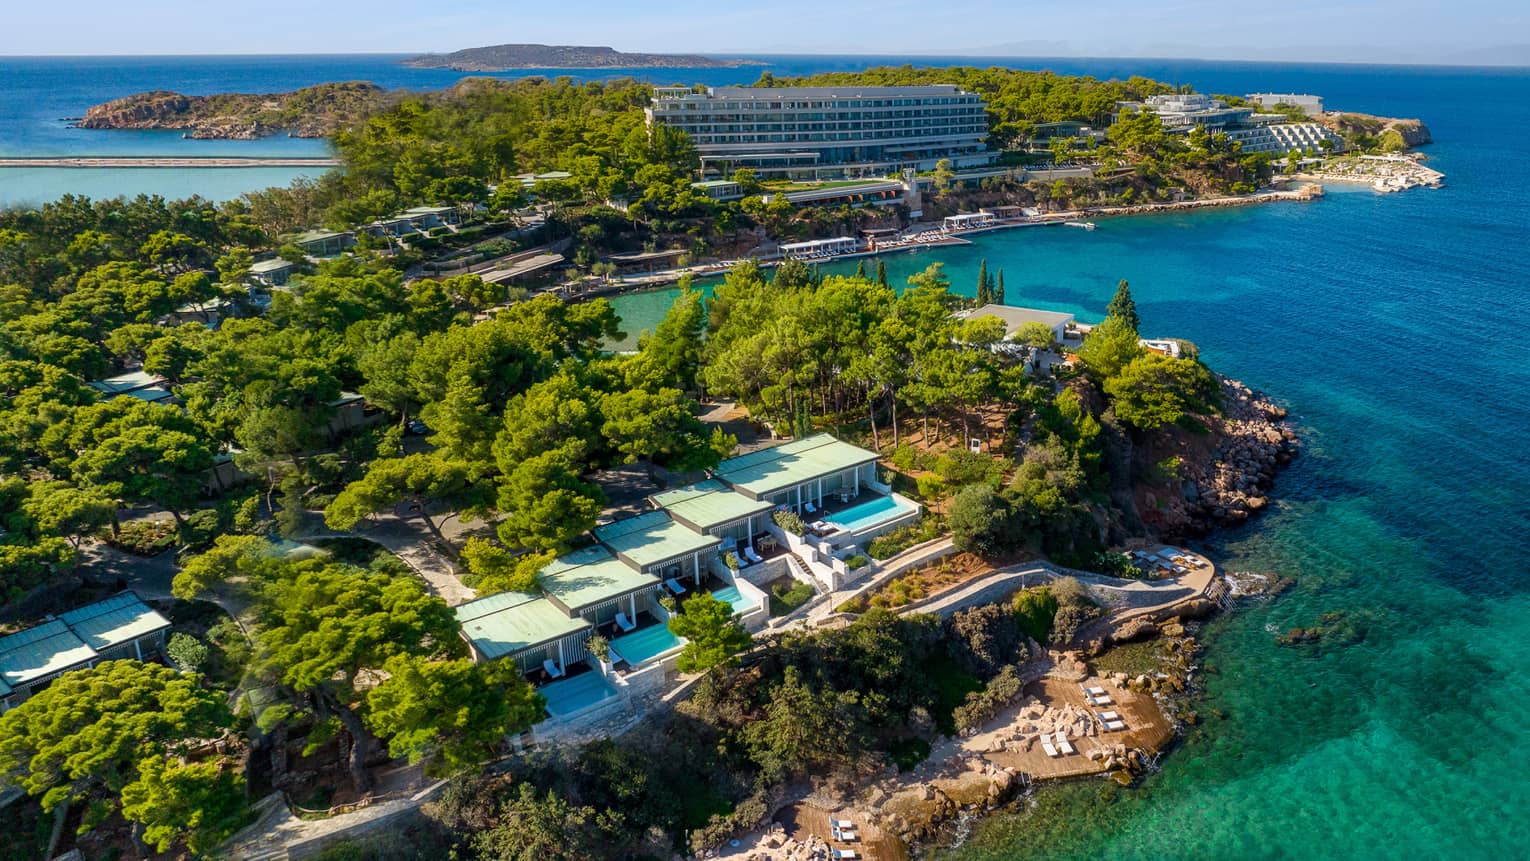 An aerial view of Four Seasons Astir Palace Hotel Athens amid greenery and overlooking the blue-green sea